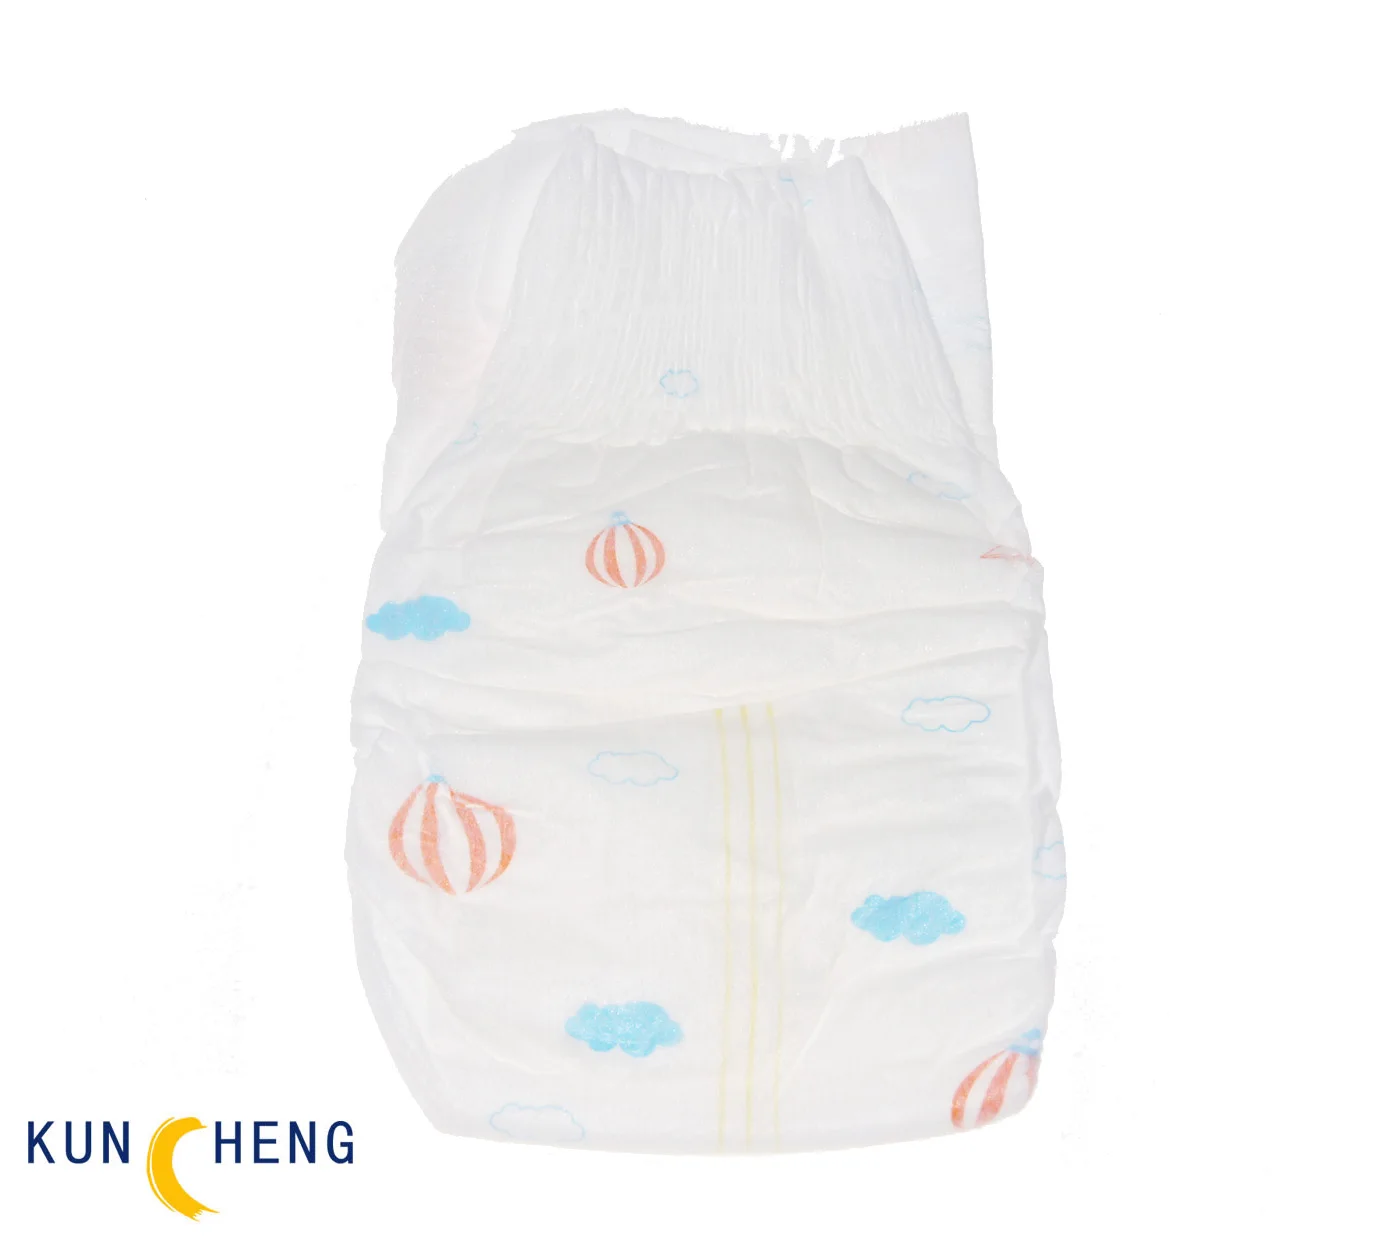 
baby diapers super thin soft touch adult diaper non woven breathable disposable high absorbability no leakage size L 30g/6g 